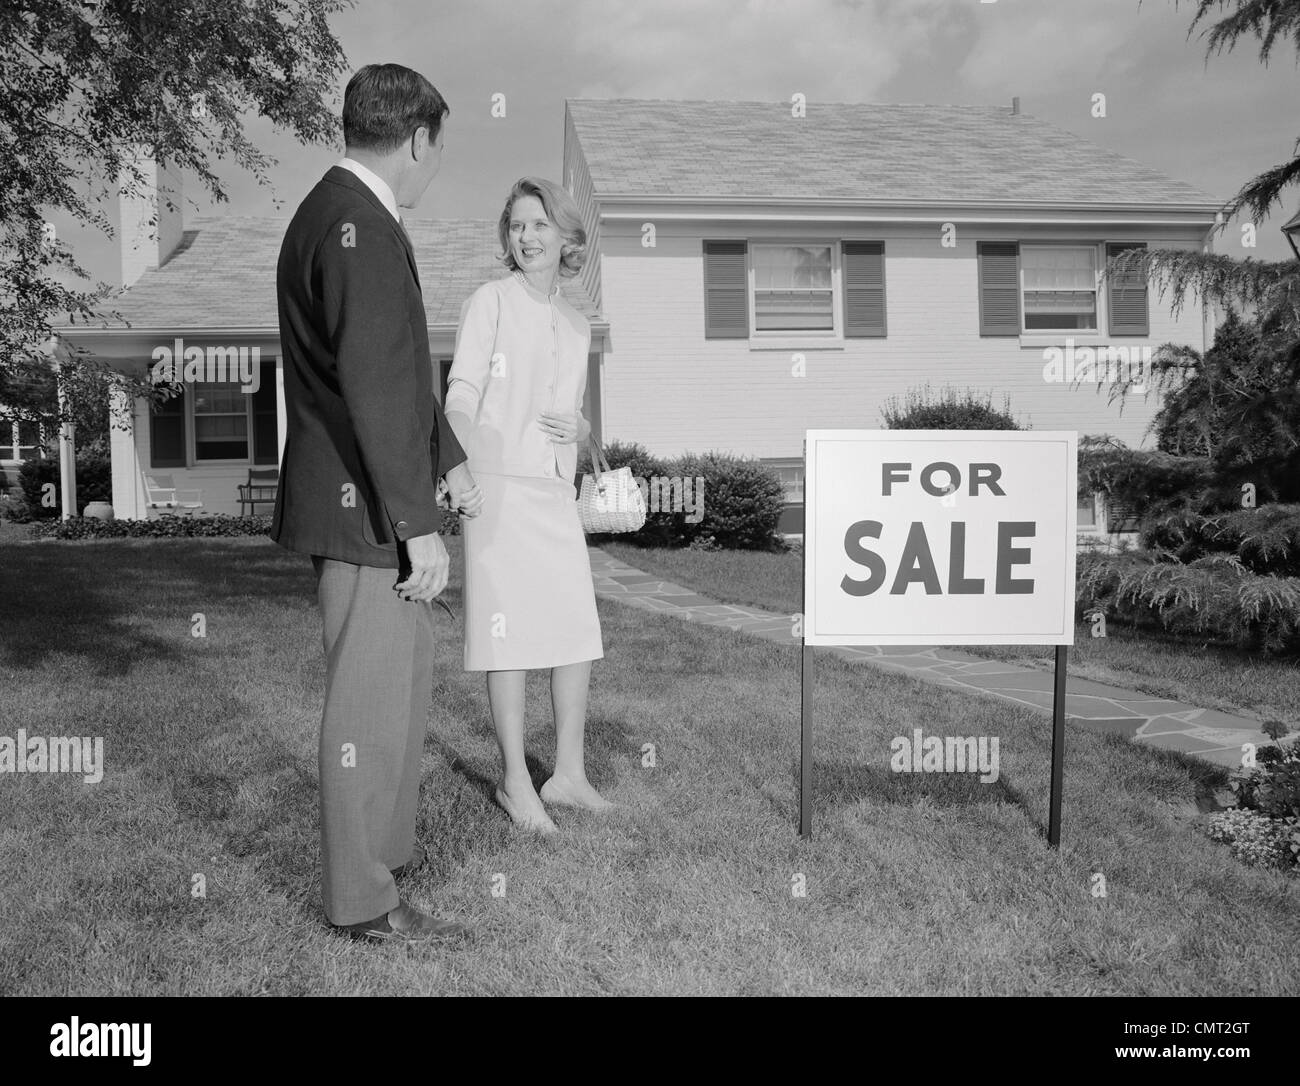 1960 HOMME FEMME COUPLE standing in front of house avec FOR SALE SIGN IN YARD Banque D'Images